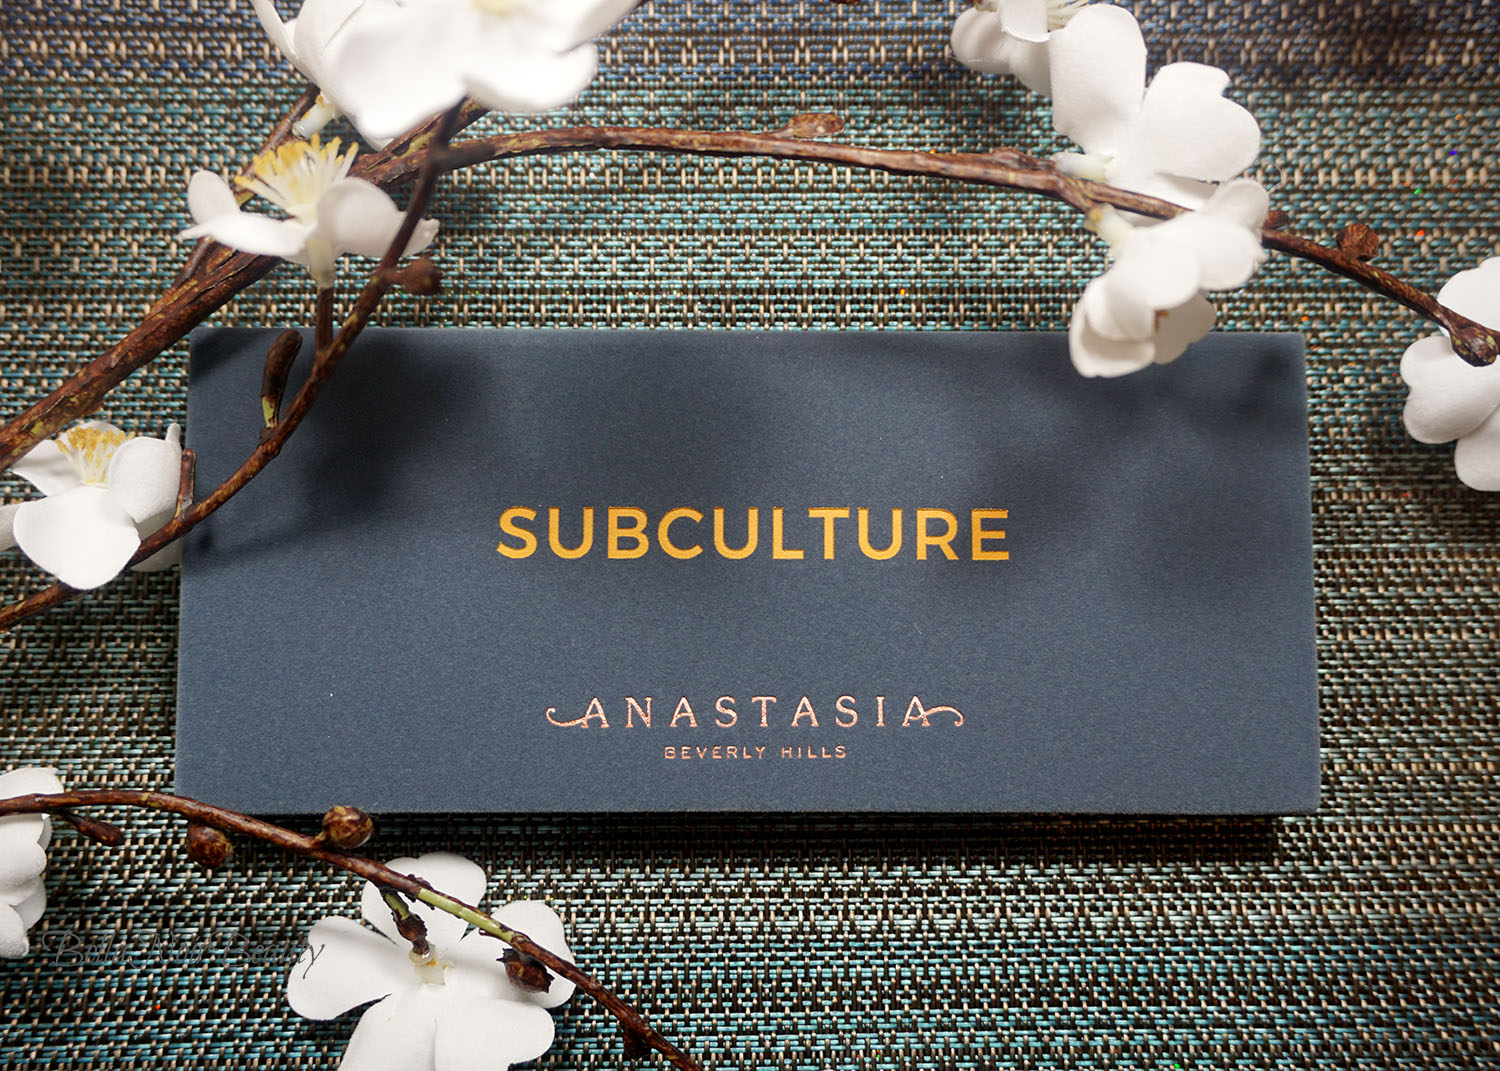 Anastasia Beverly Hills Subculture Palette | bellanoirbeauty.com